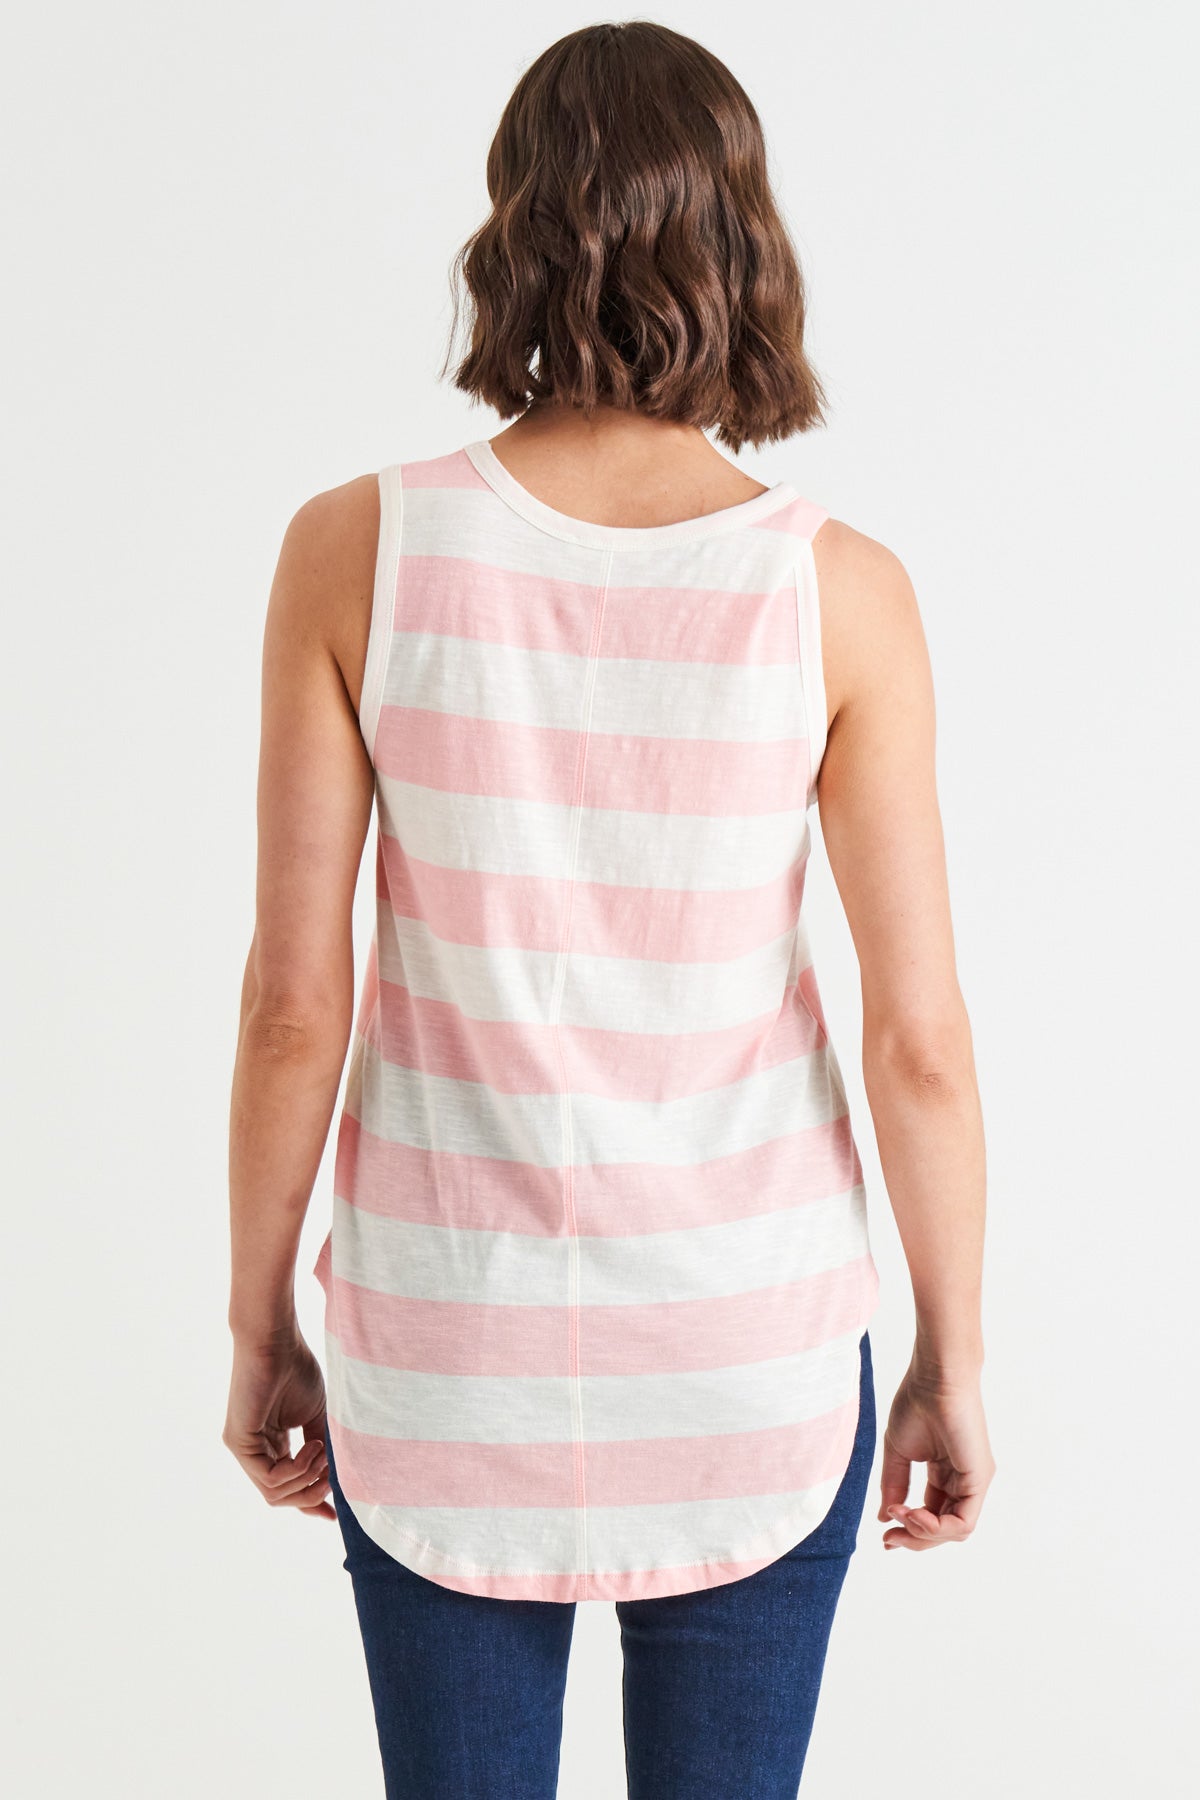 Keira Relaxed Scoop Neck Long Cotton Basic Tank - Baby Pink Stripe